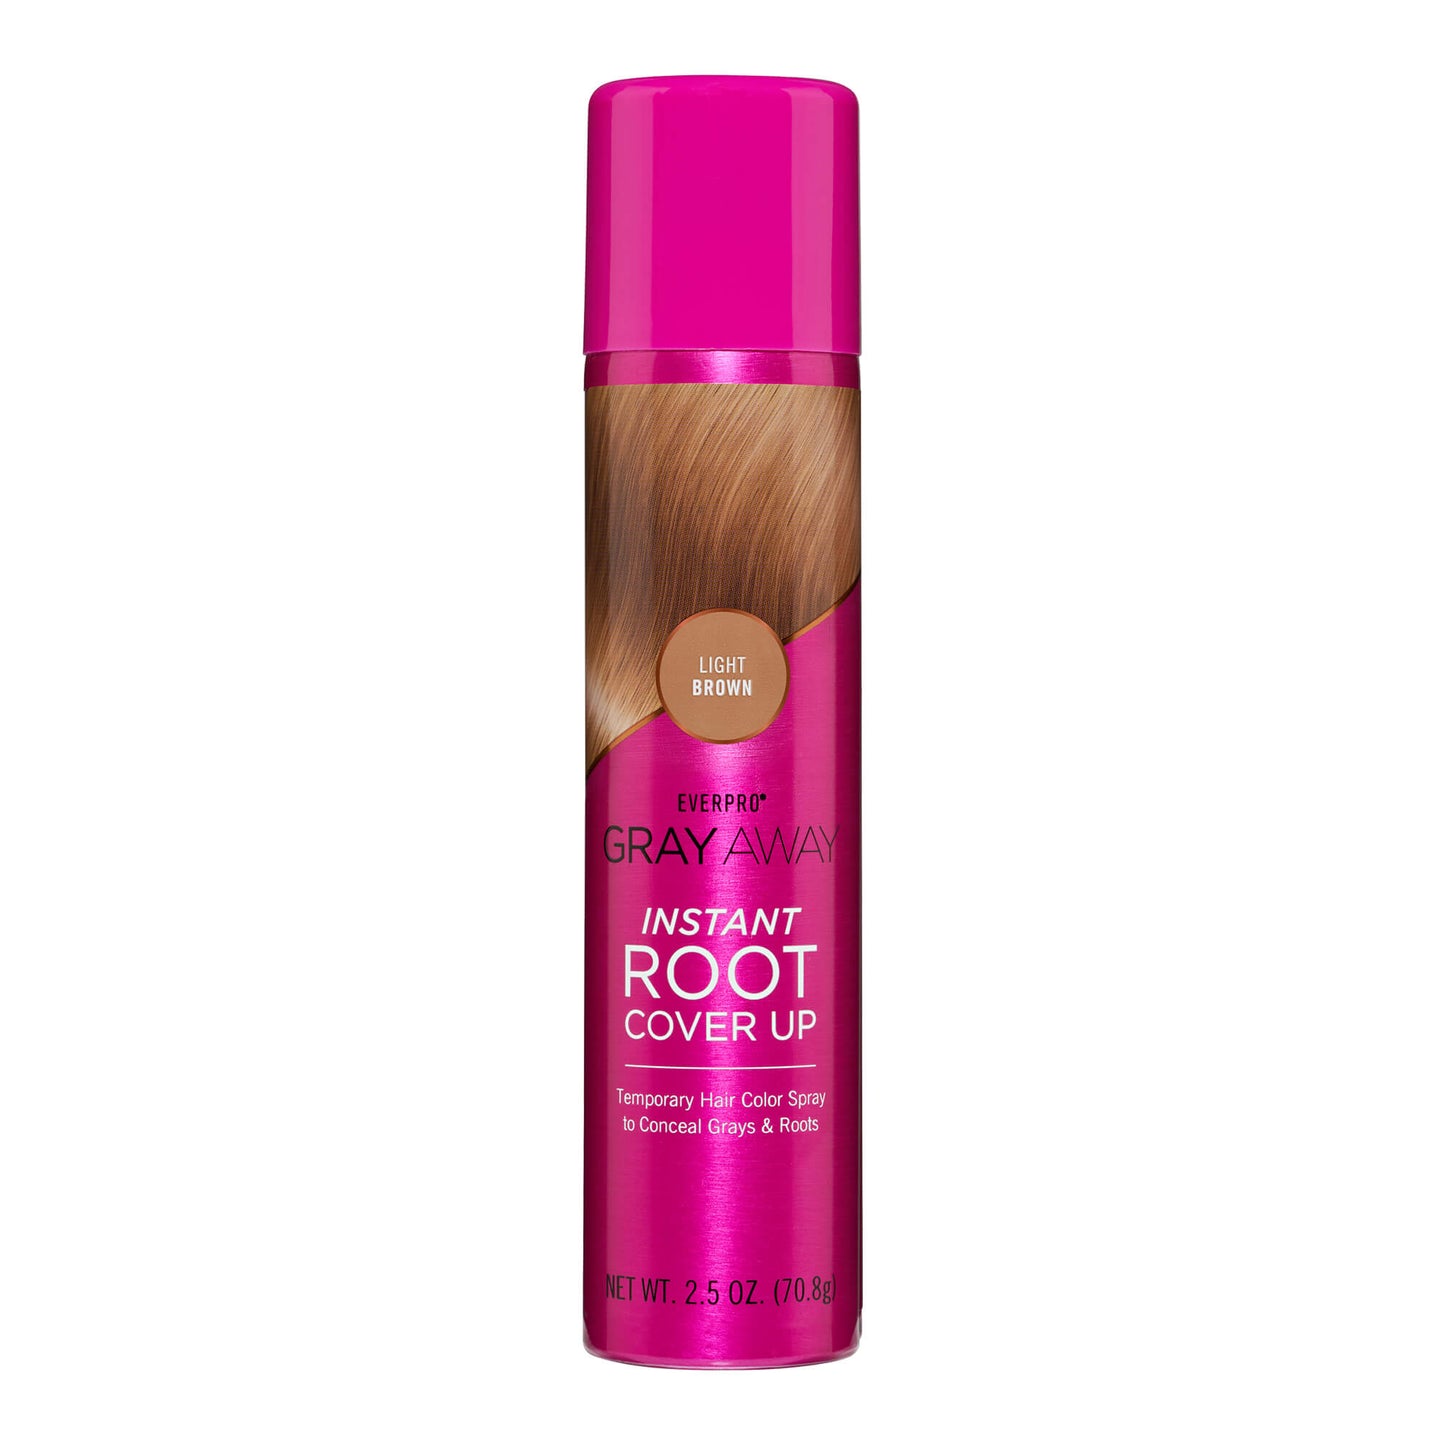 Instant Root Cover Up